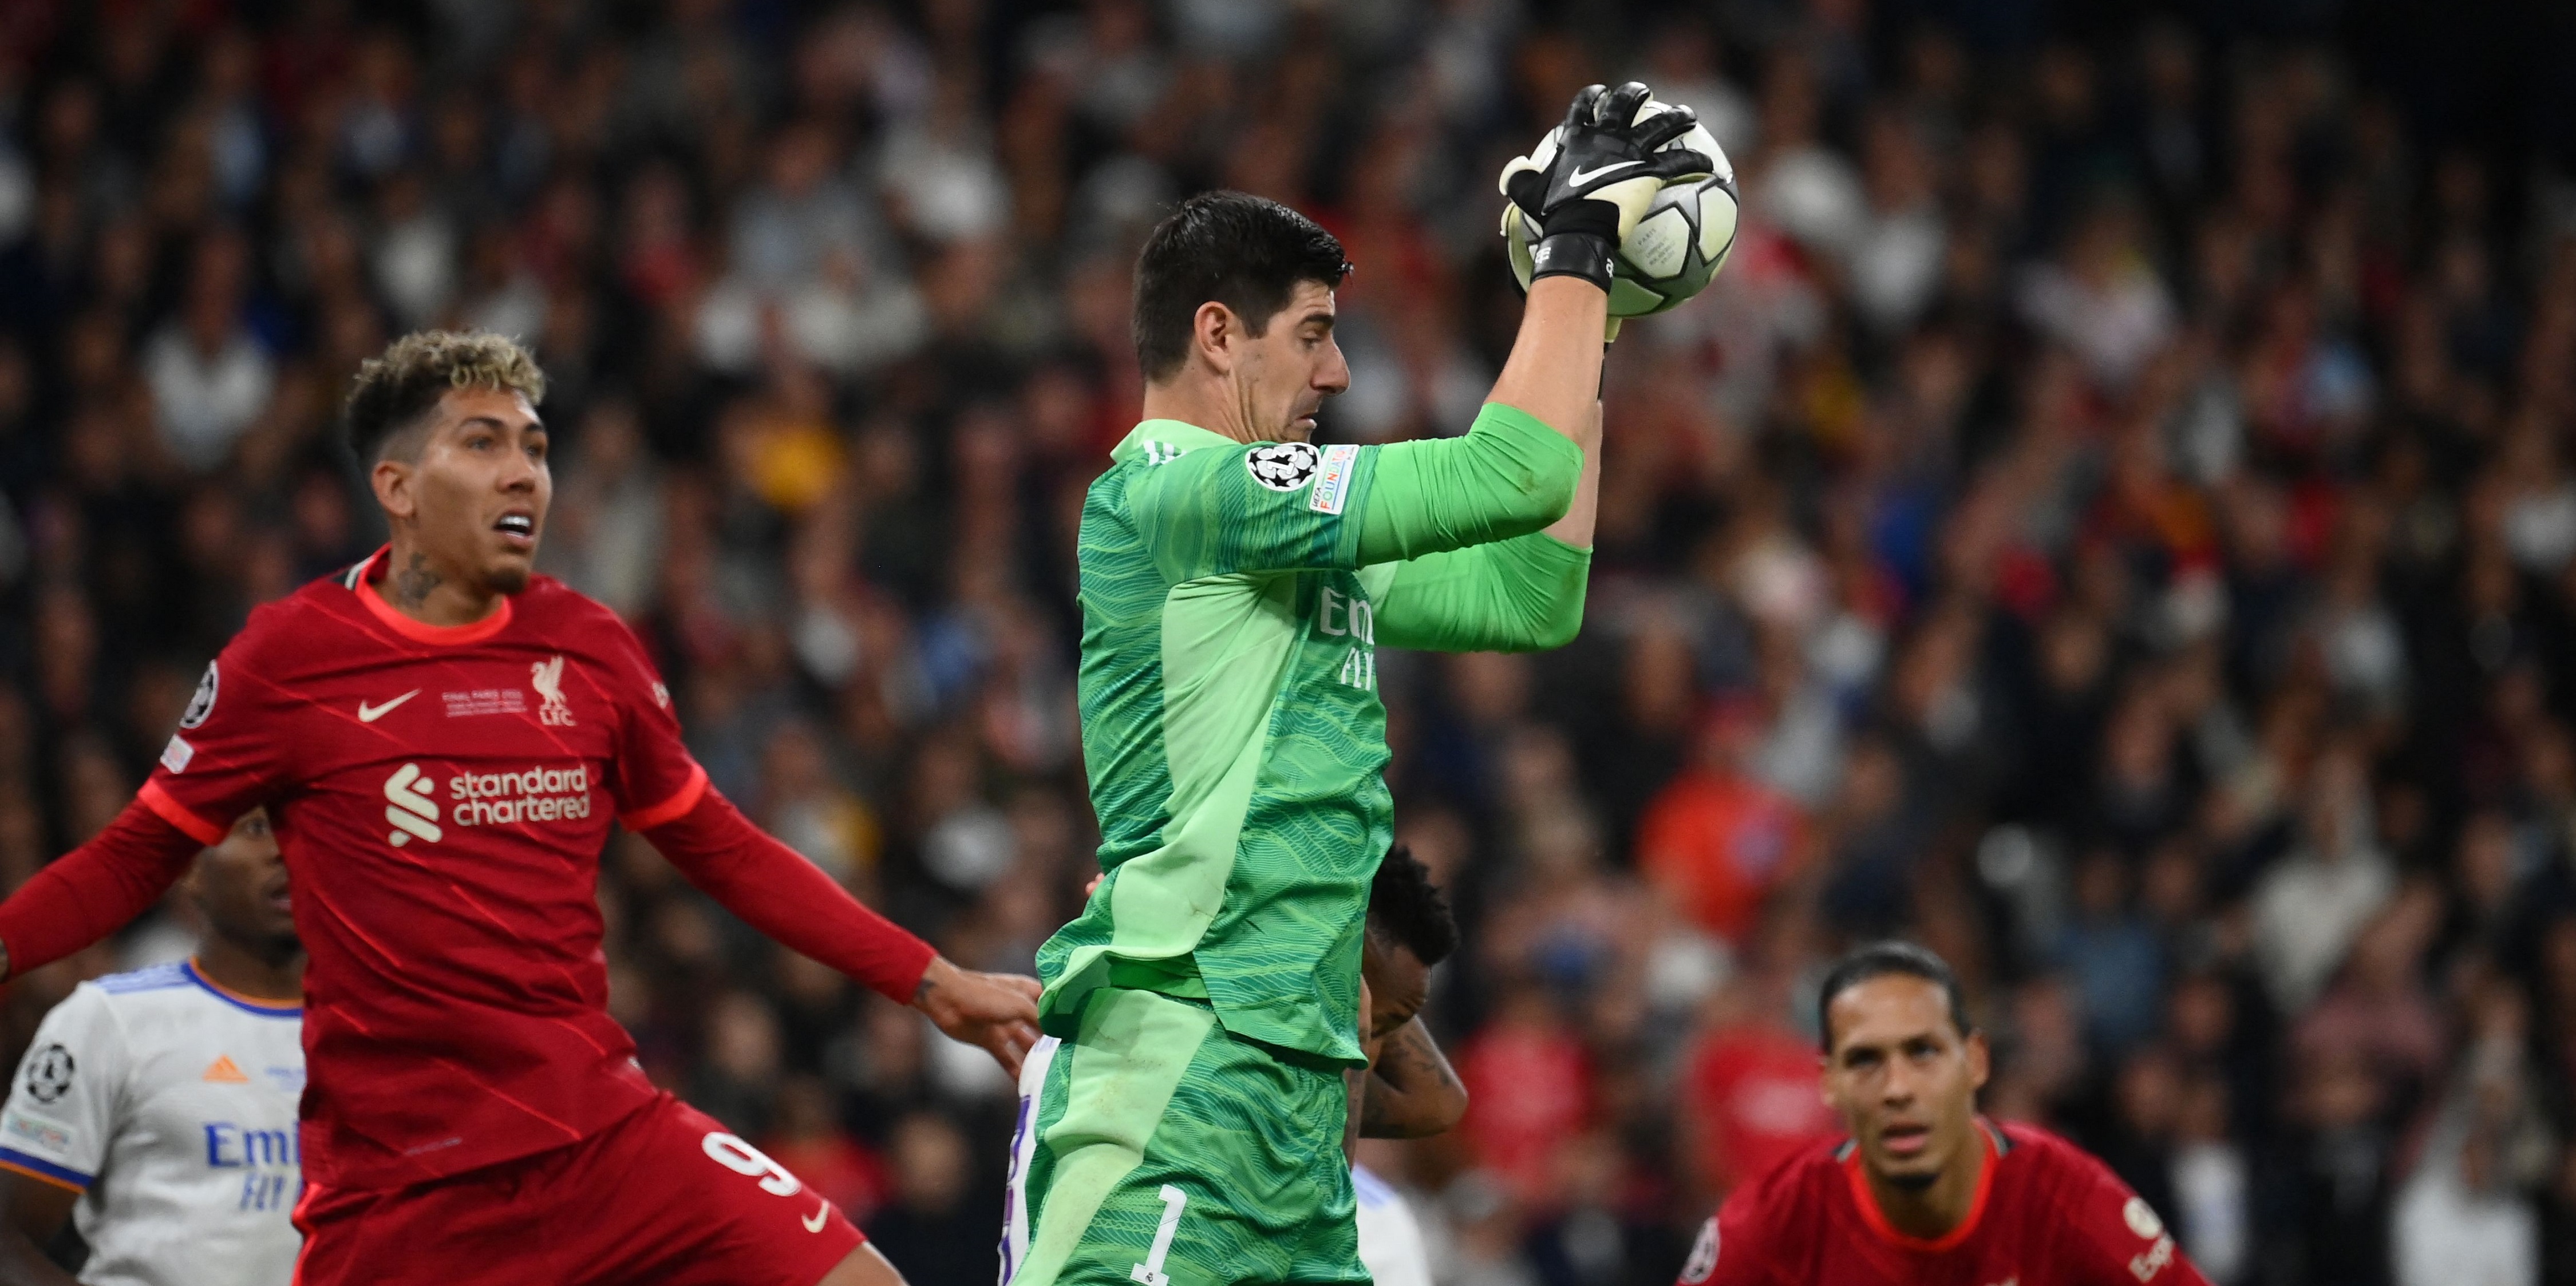 Man of the match Courtois sends Liverpool a message after tense Champions League final win